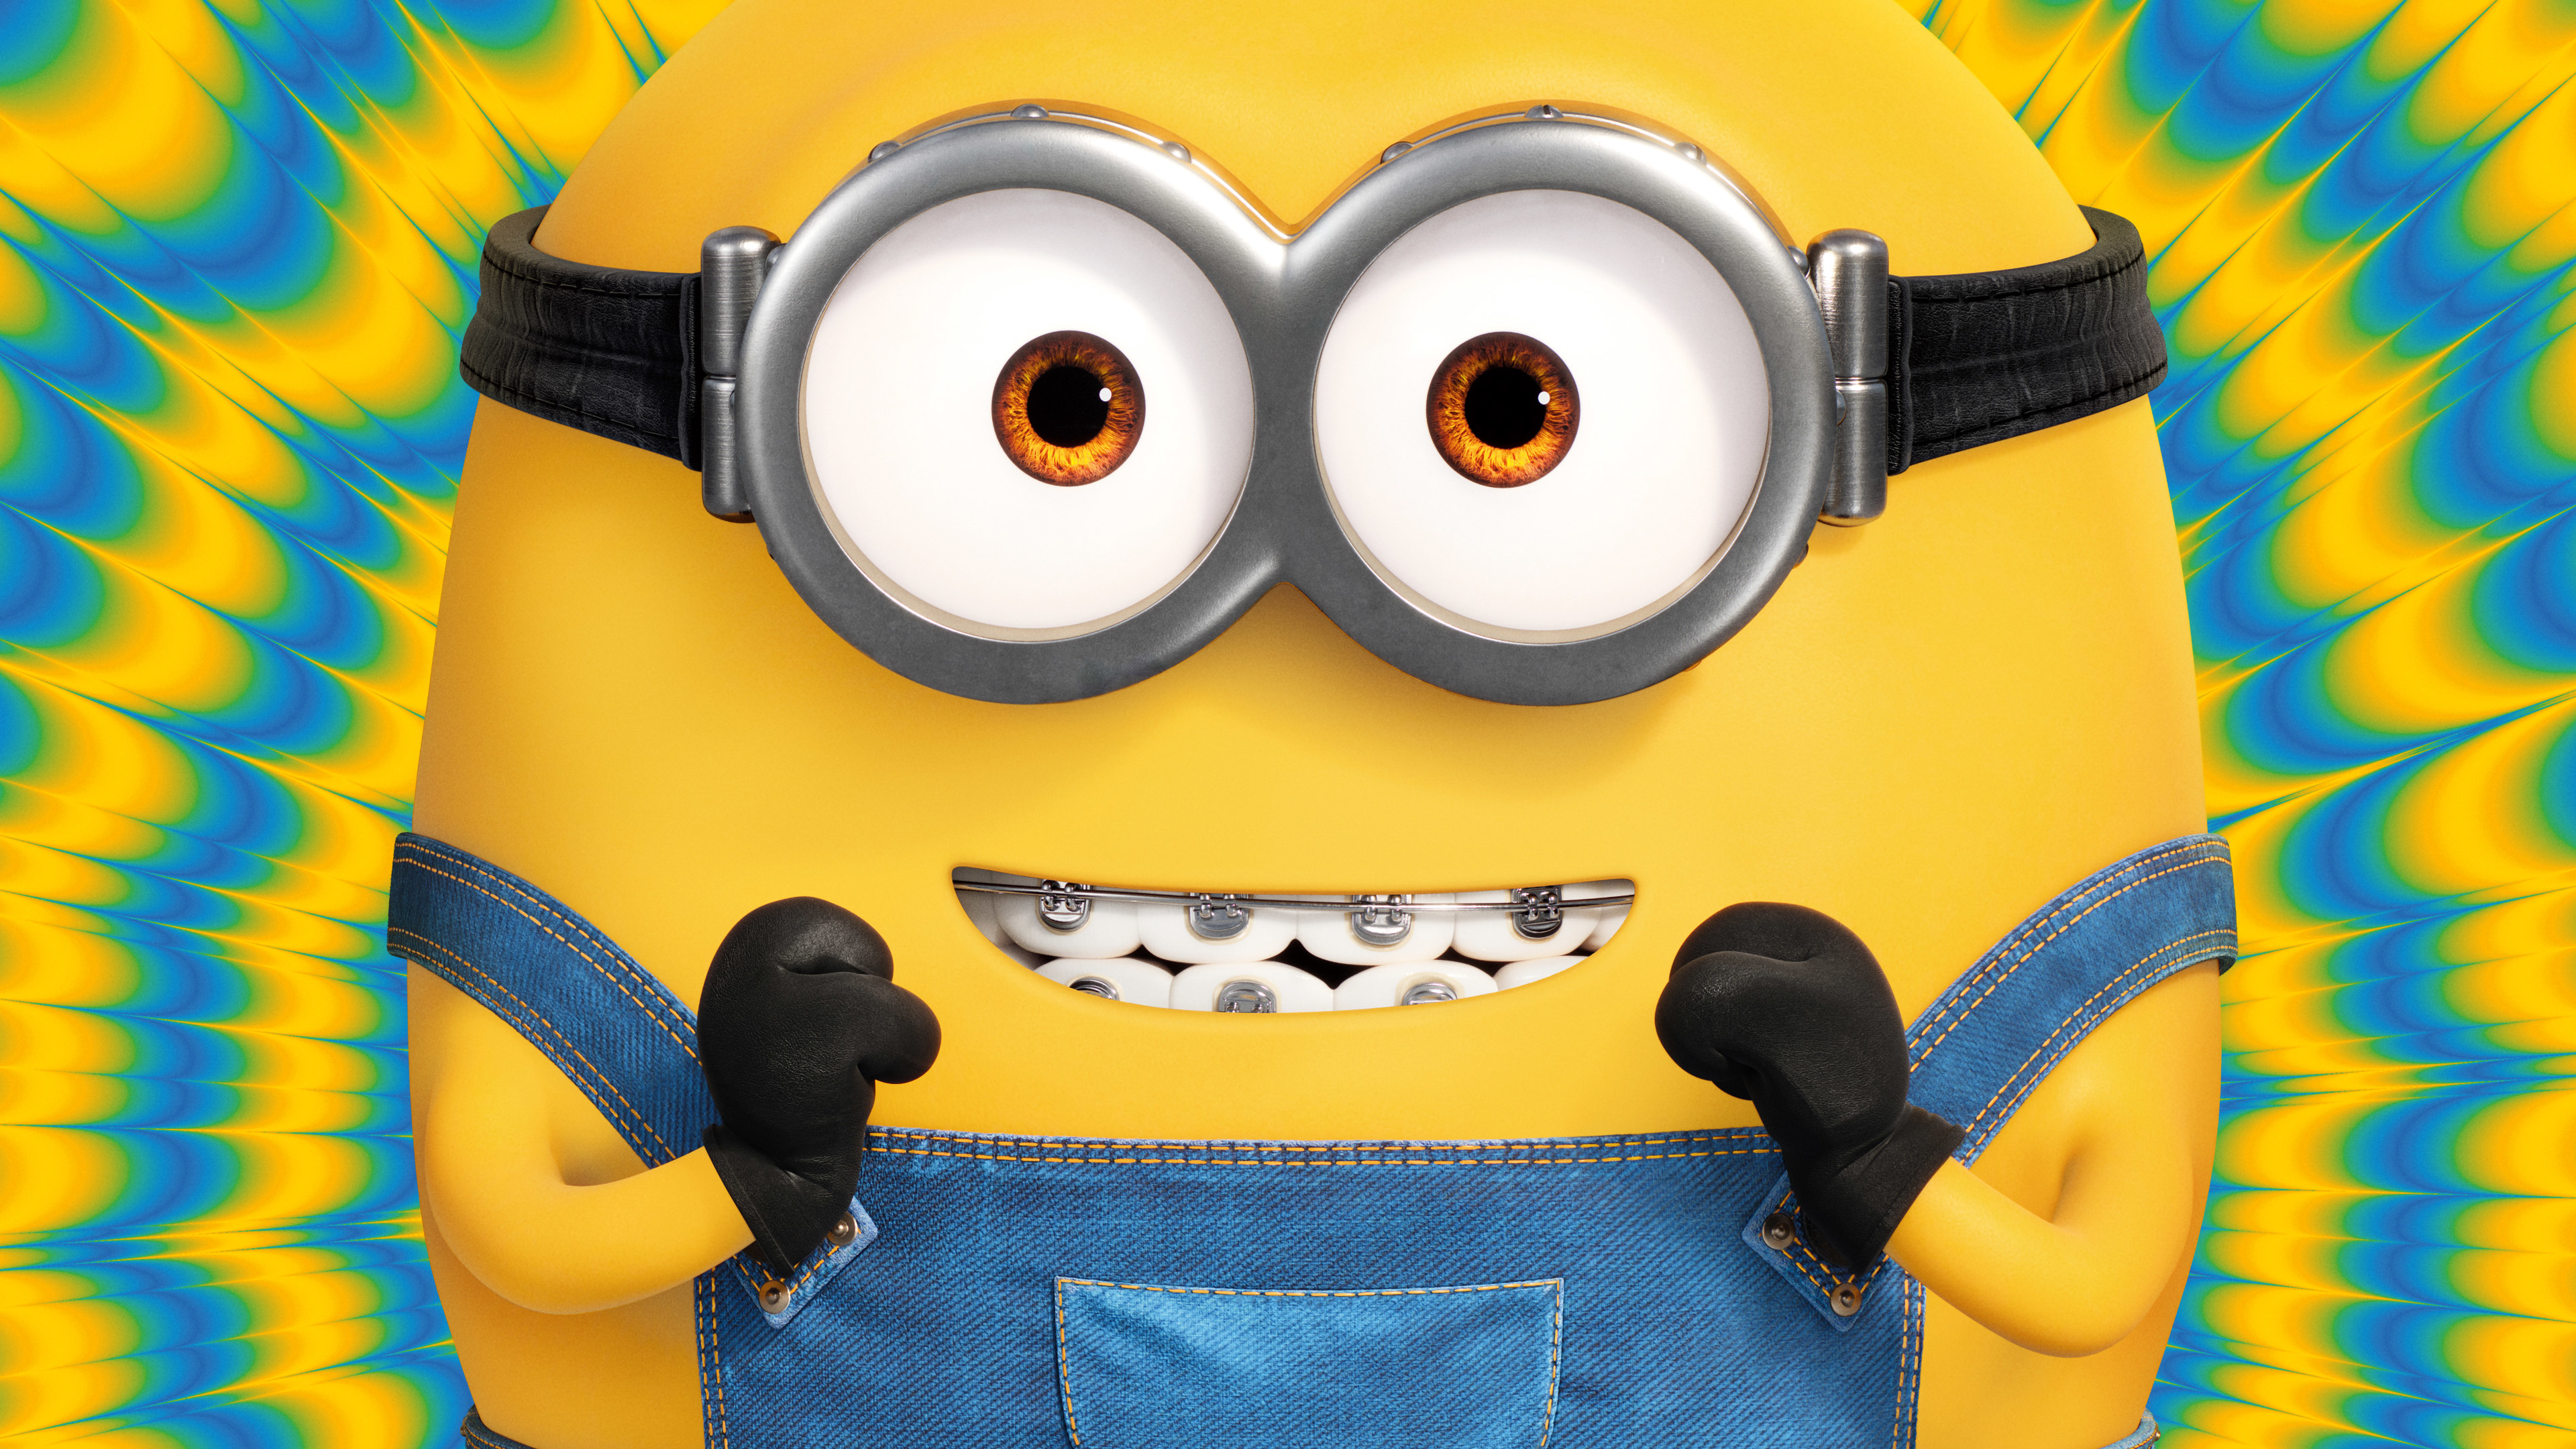 3840x2160 Minions 2020 4K Wallpaper, HD Movies 4K Wallpapers, Images